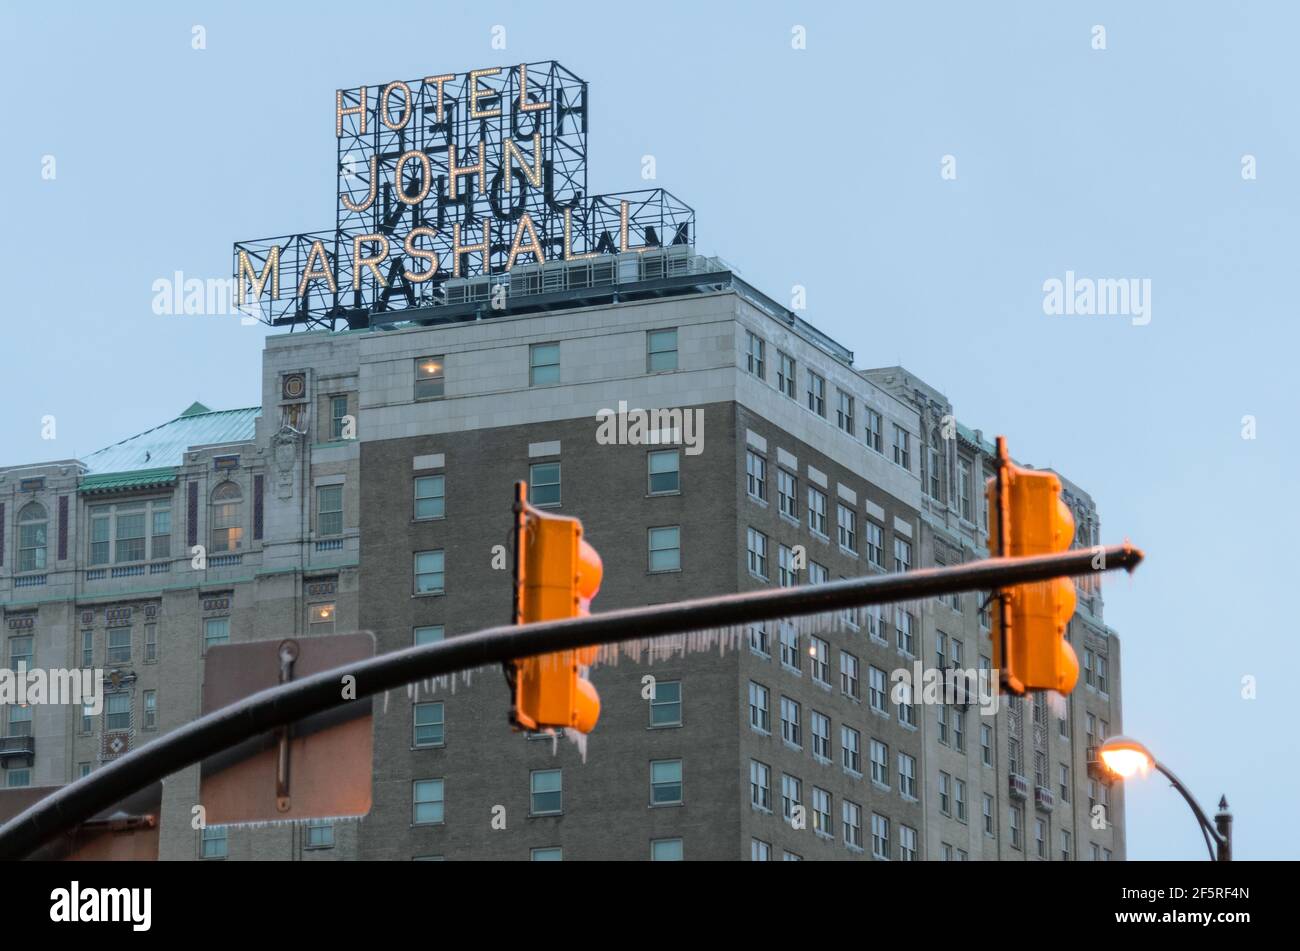 The Hotel John Marshall sign in Richmond, Virginia in the middle of a winter ice storm Stock Photo